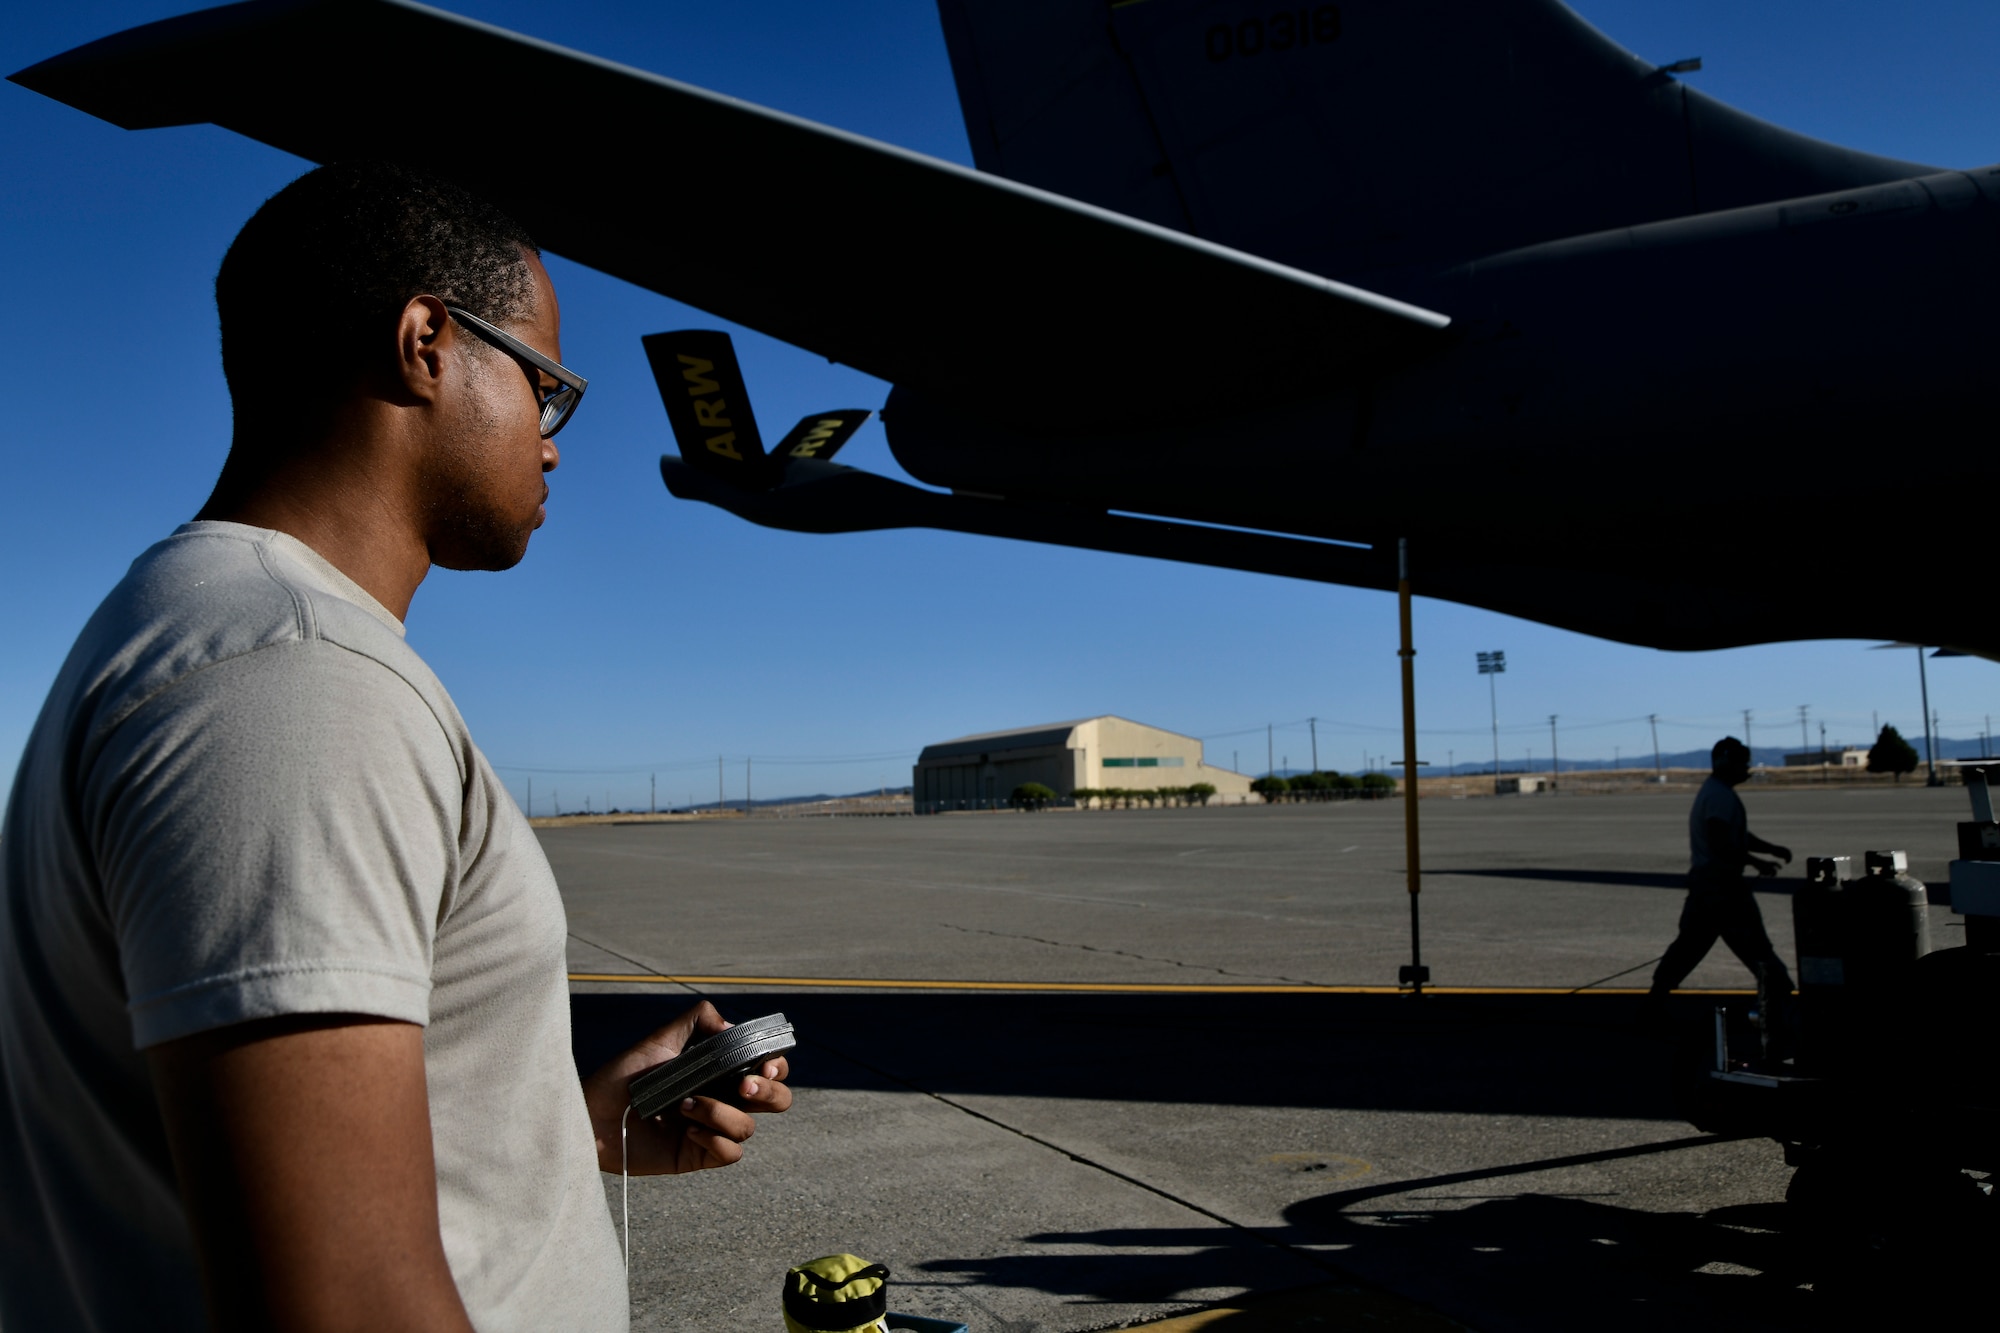 Airman 1st Class Roderius Spearman, 9th Logistics Readiness Squadron Petroleum, Oil and Lubricants distribution system operator, operates a fuels cart that is connected to an underground fuel line during a refueling exercise September 6, 2019 at Beale Air Force Base, California. (U.S. Air Force photo by Tech. Sgt. Alexandre Montes)